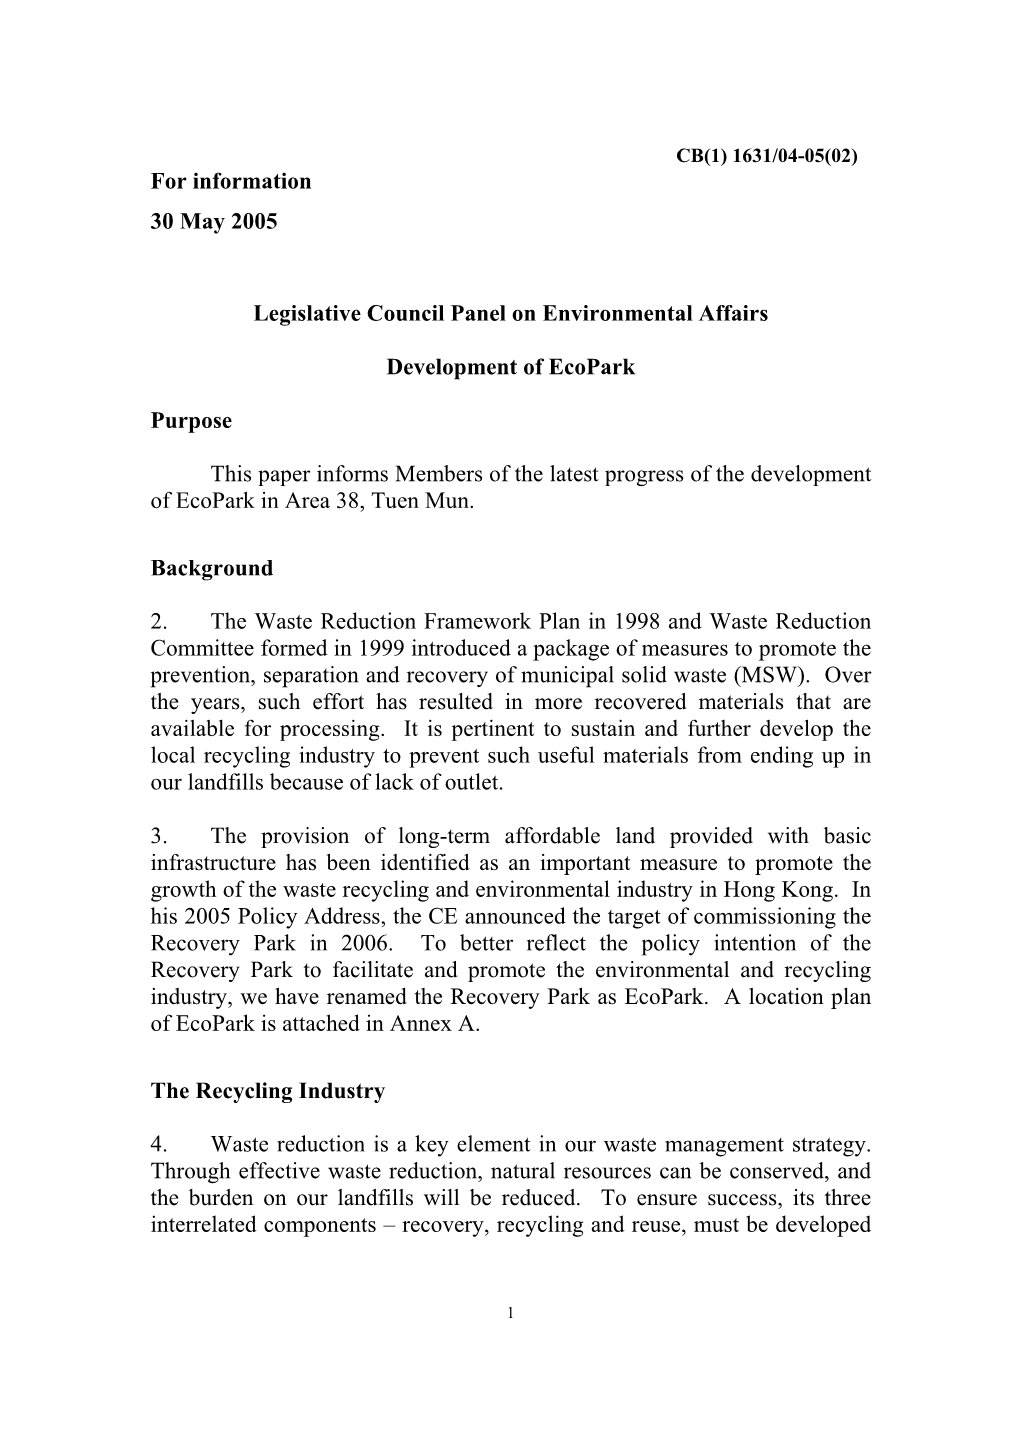 For Information 30 May 2005 Legislative Council Panel on Environmental Affairs Development of Ecopark Purpose This Paper Informs